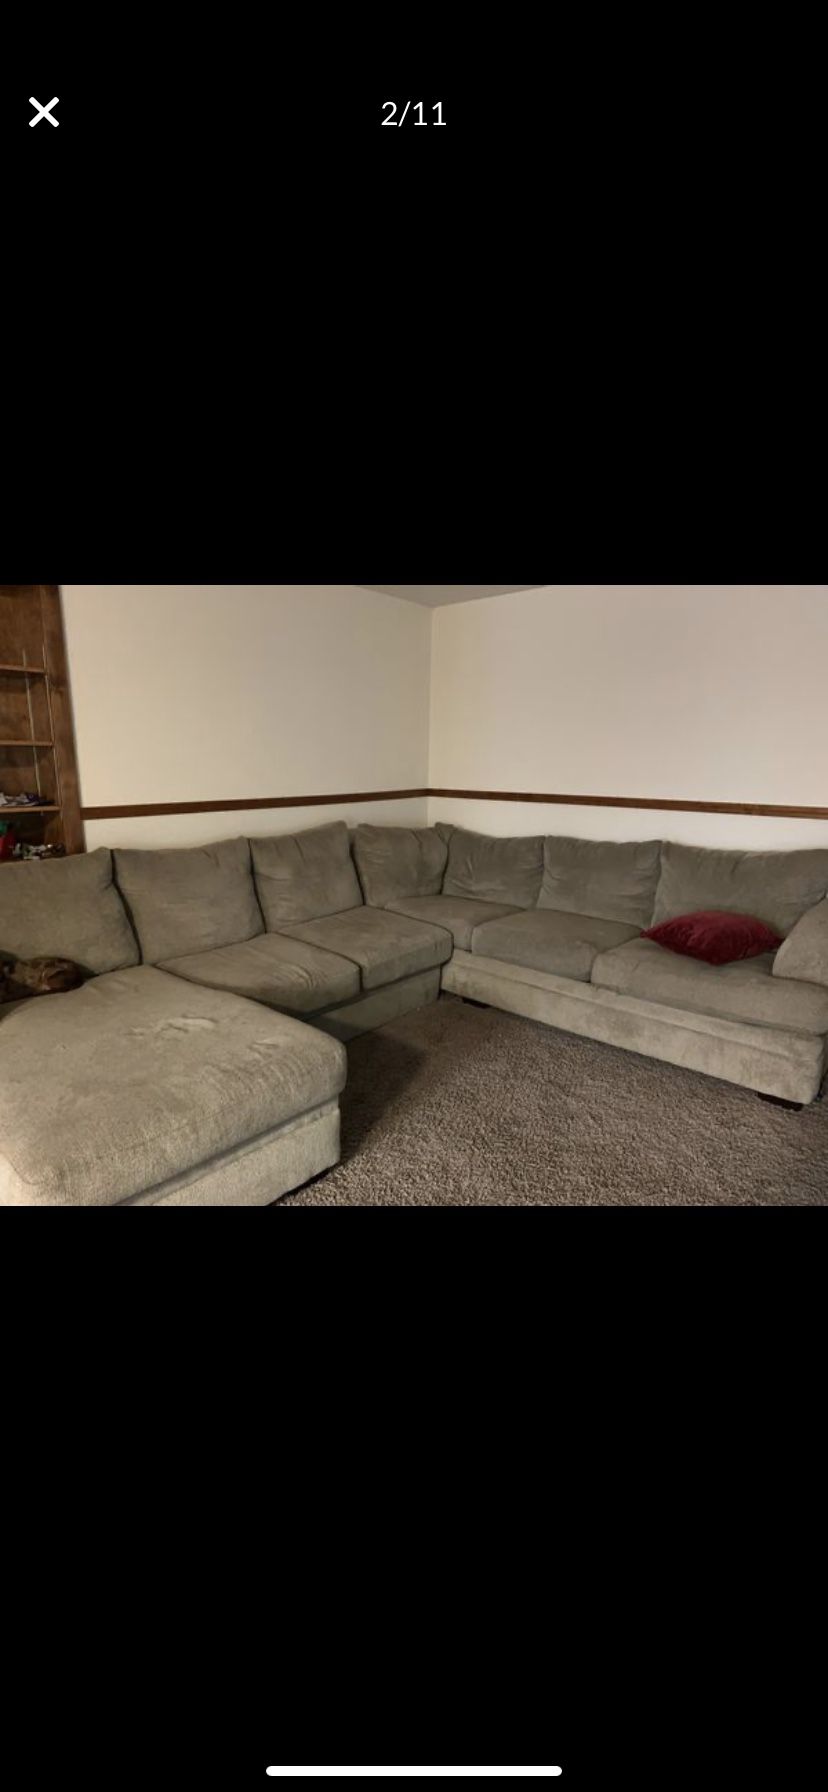 Big sectional couches decent/fair condition